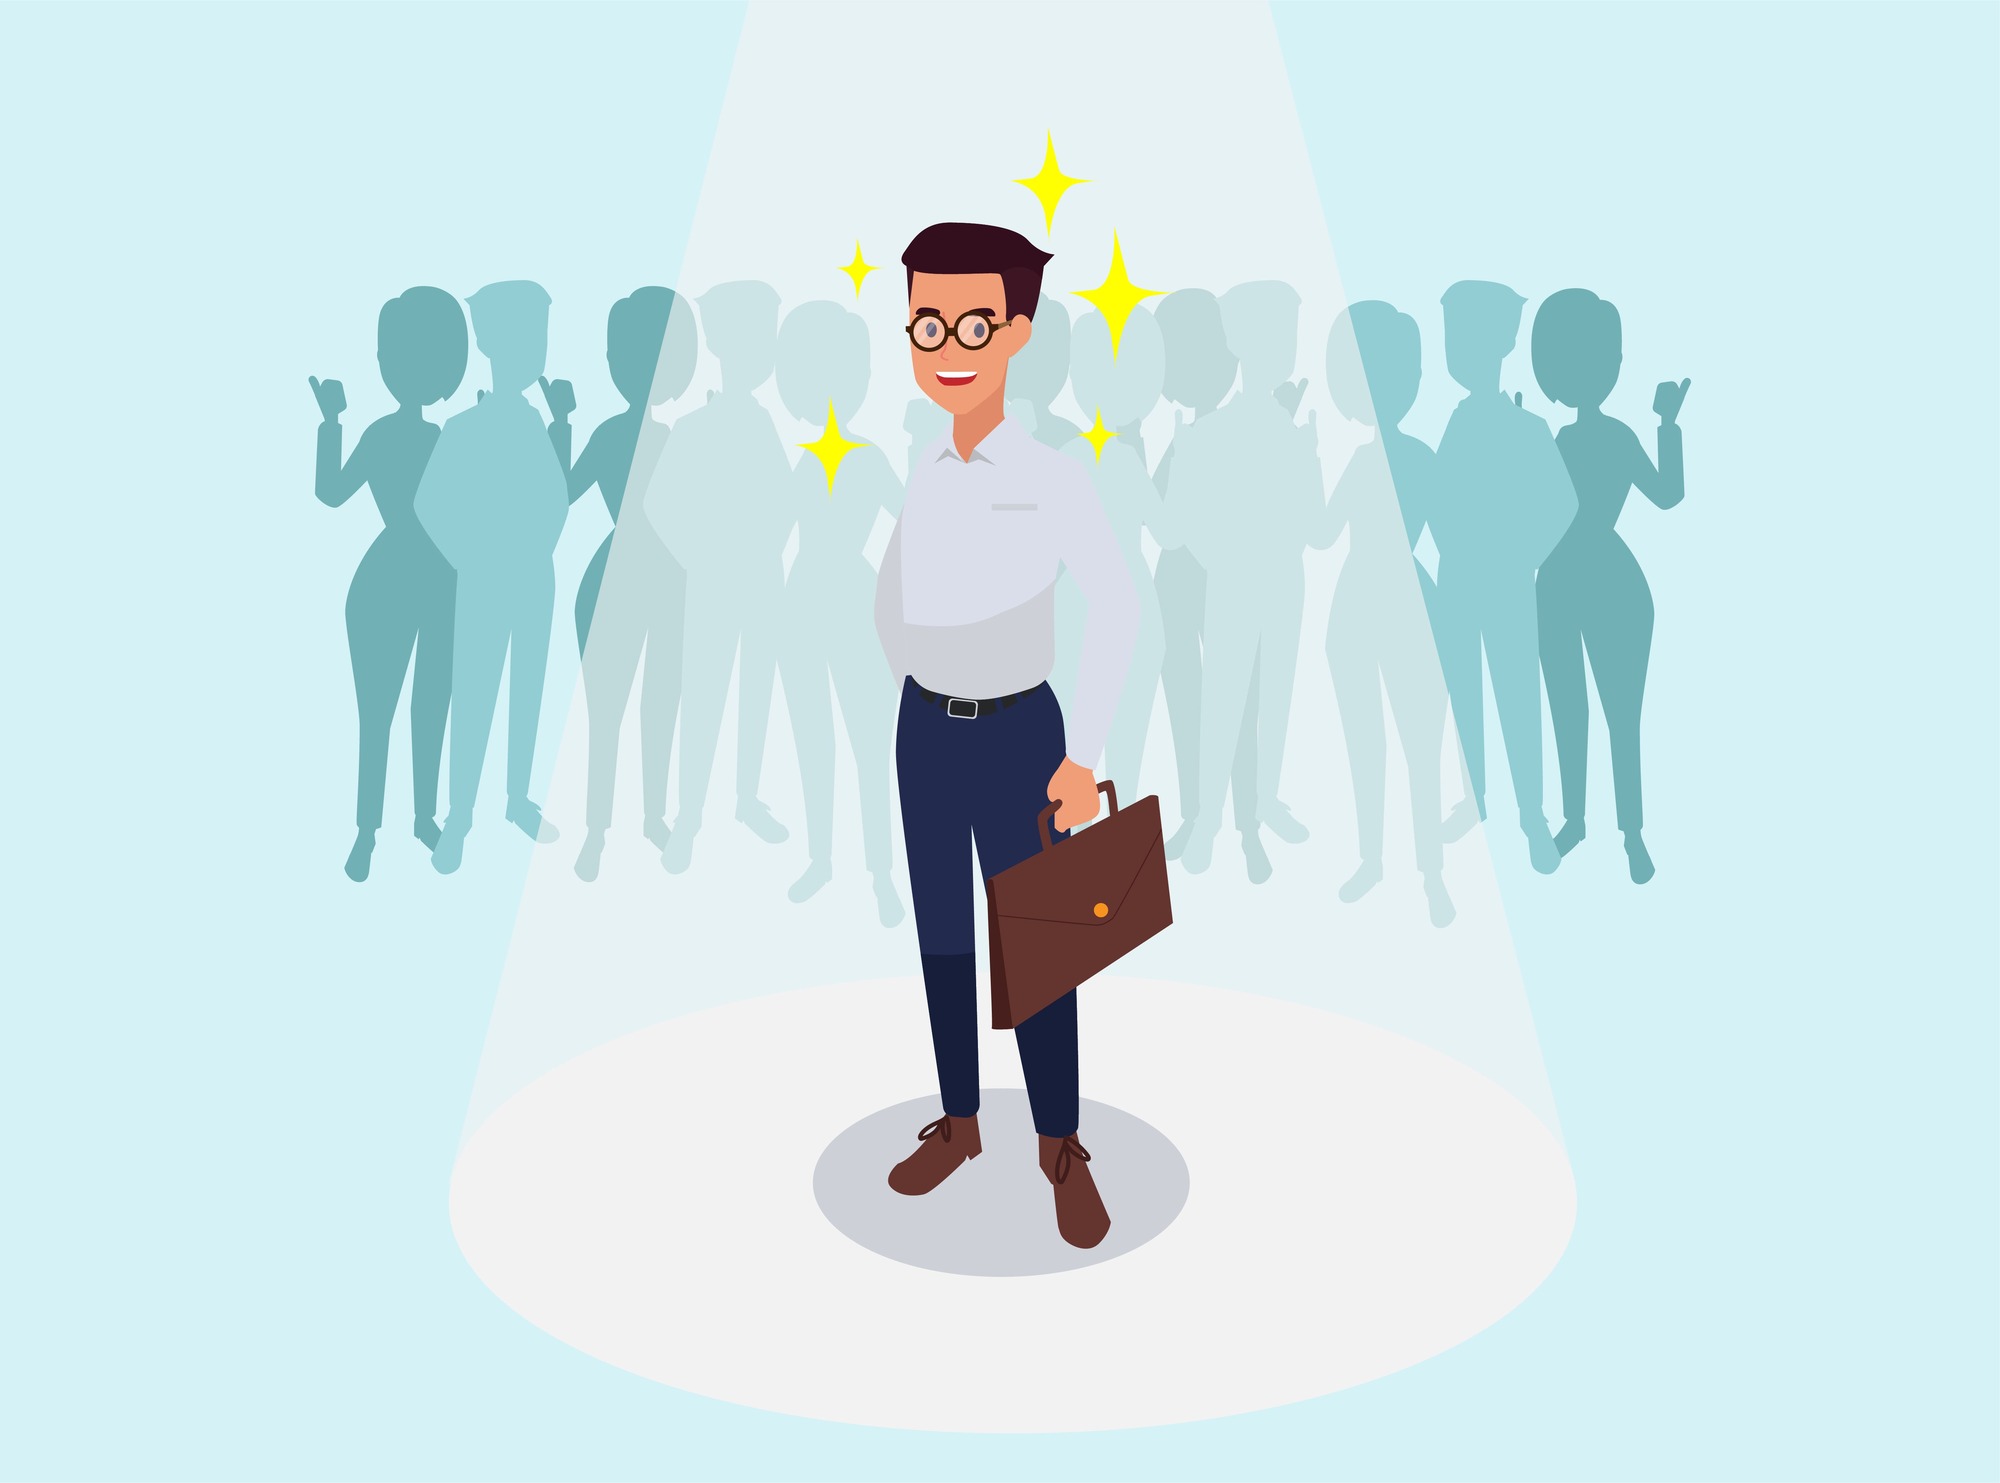 From Boss to Leader - Guide to Effective Leadership